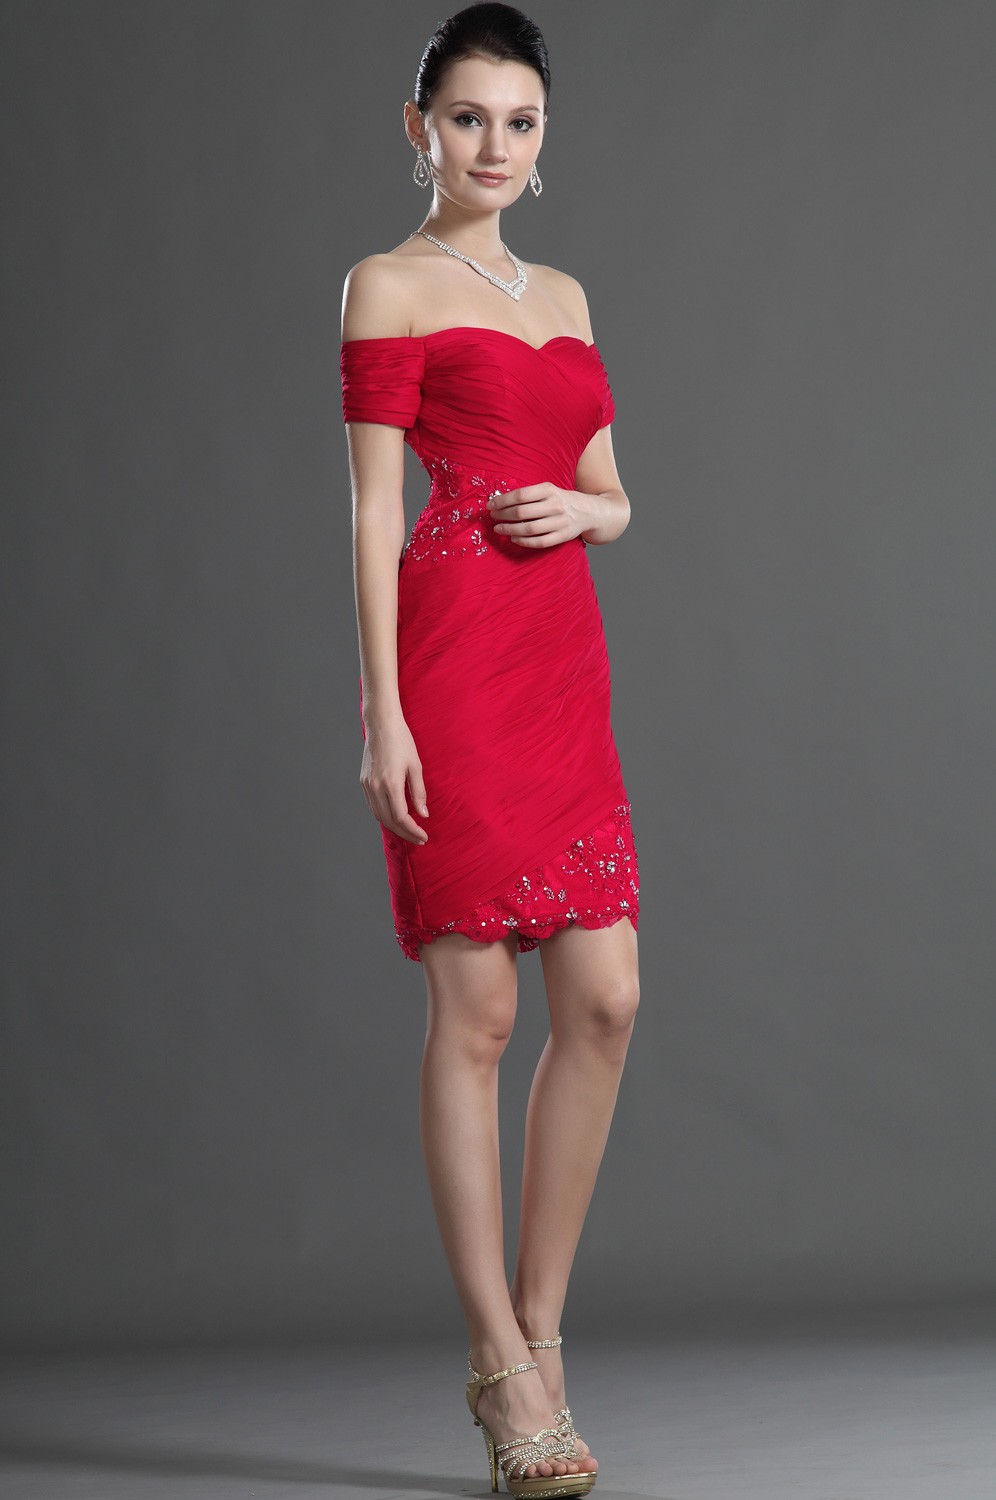 Red Cocktail Dress Picture Collection Dressedupgirl Com